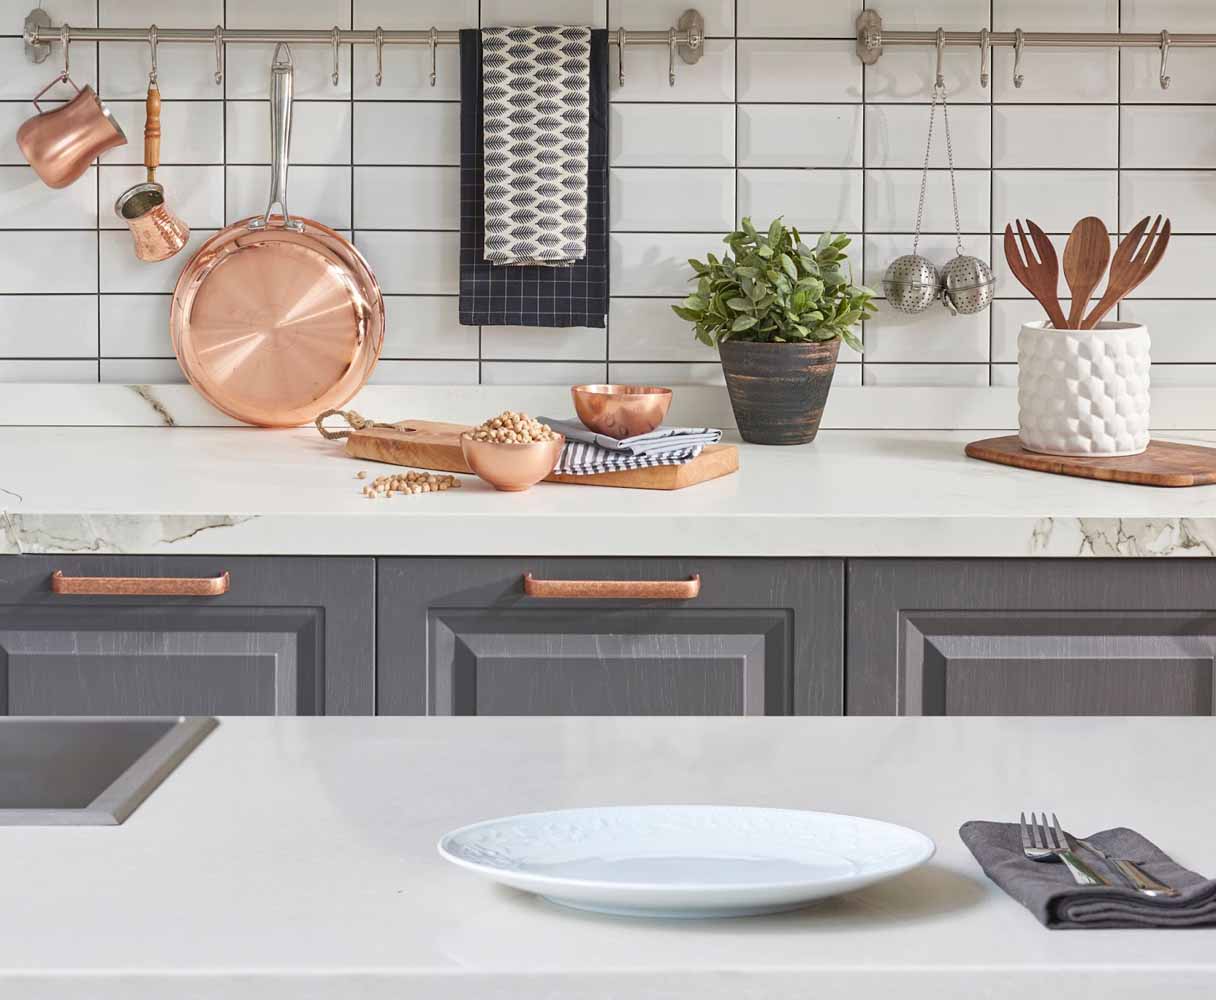 Decorative bars with hooks mounted to the backsplash provides hanging storage for pans, utensils, hand towels, and other frequently used items, freeing up counter space.